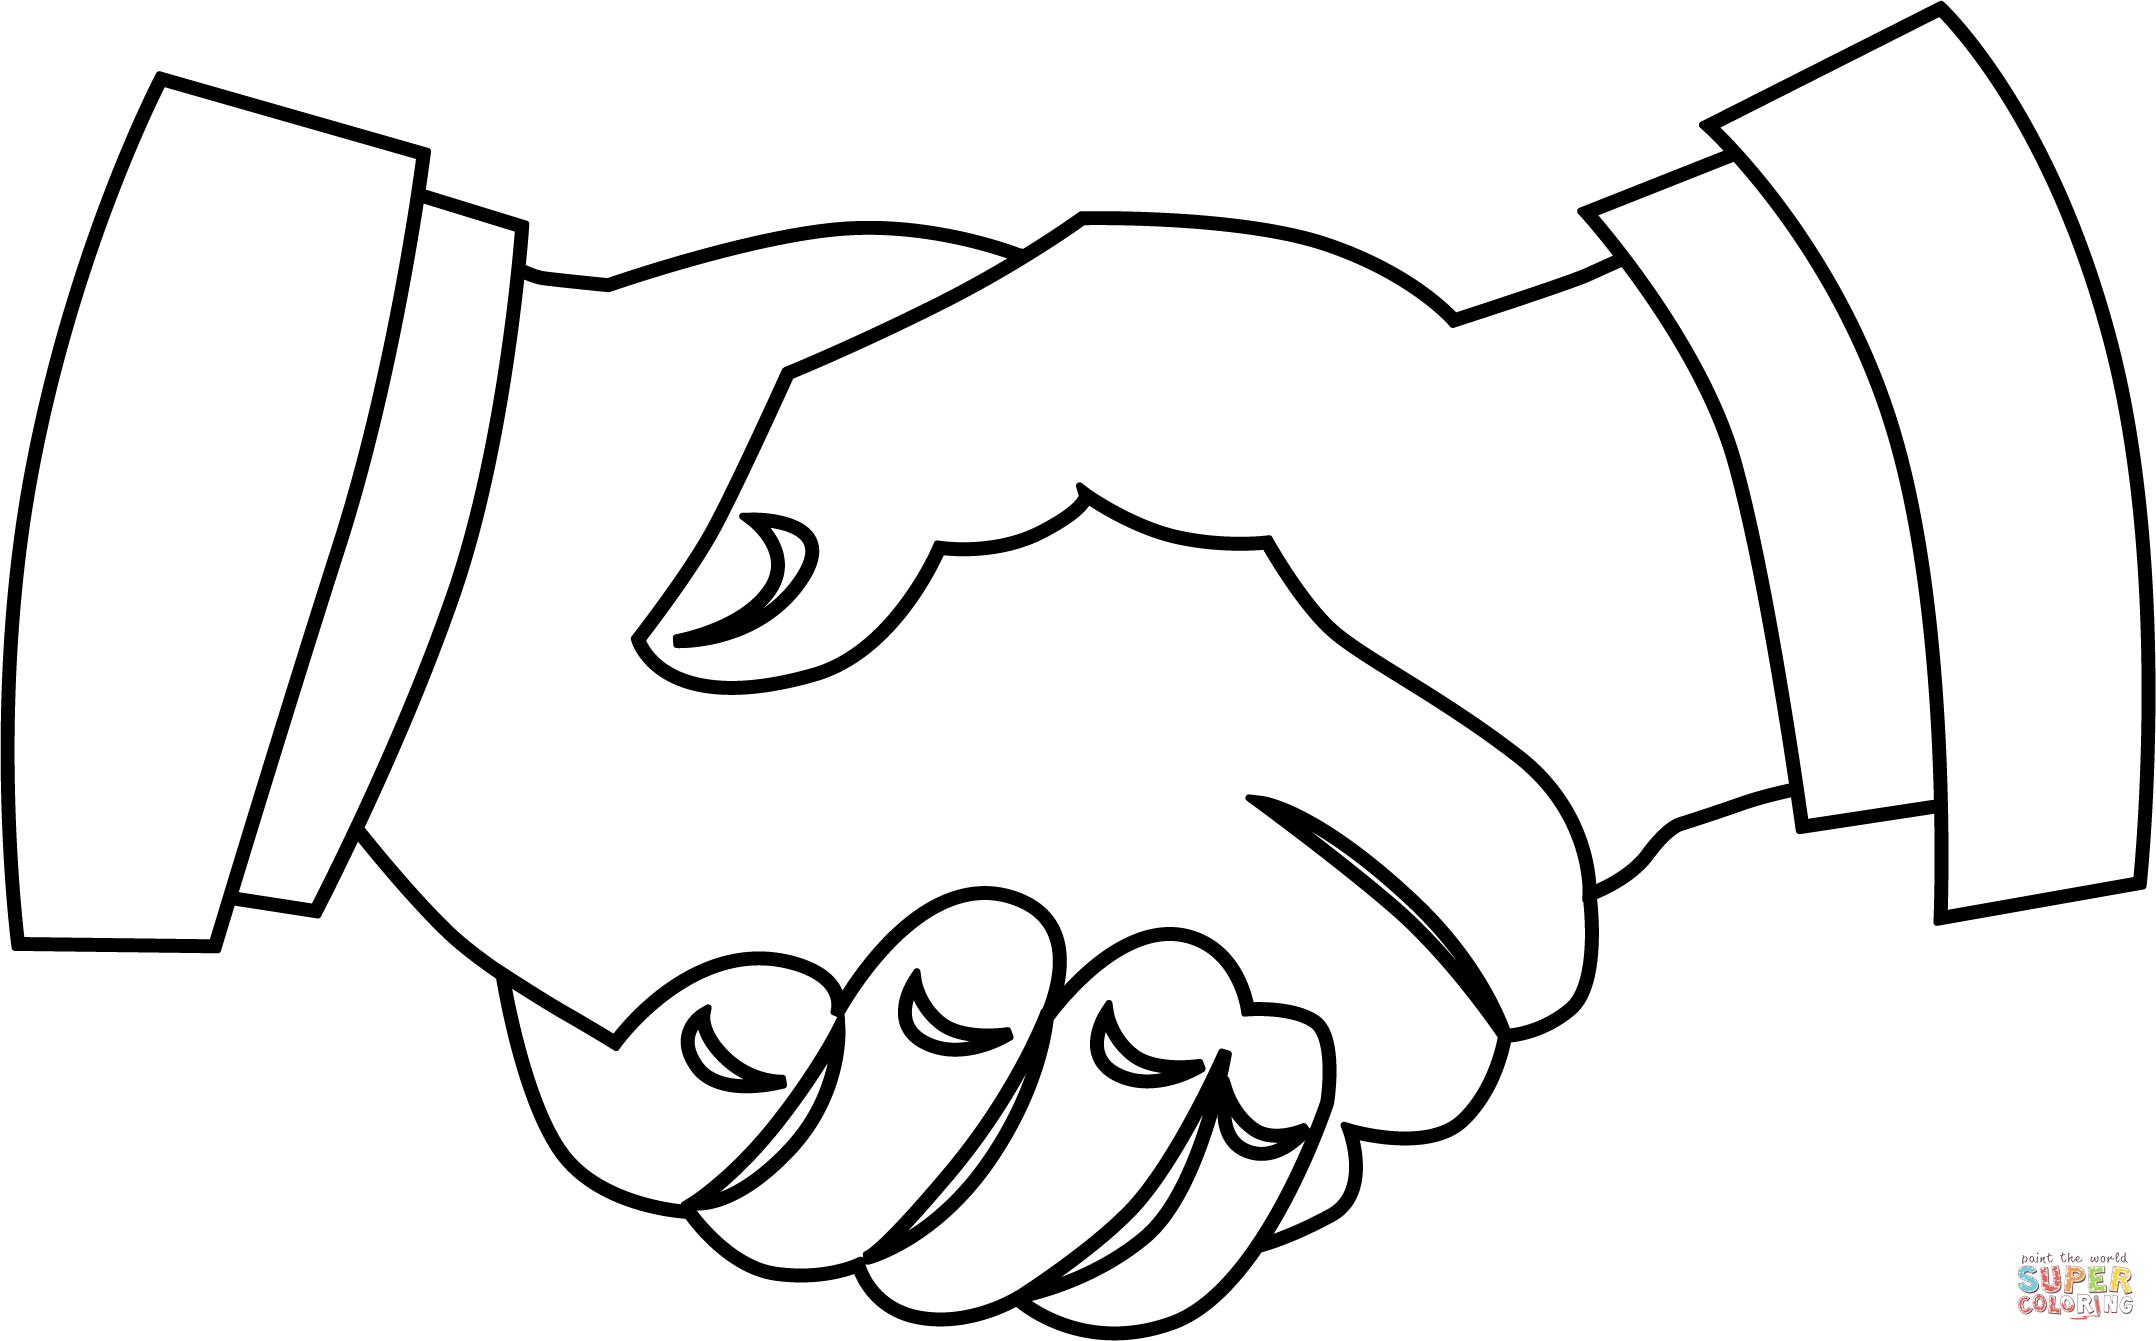 Handshake coloring page | Free Printable Coloring Pages